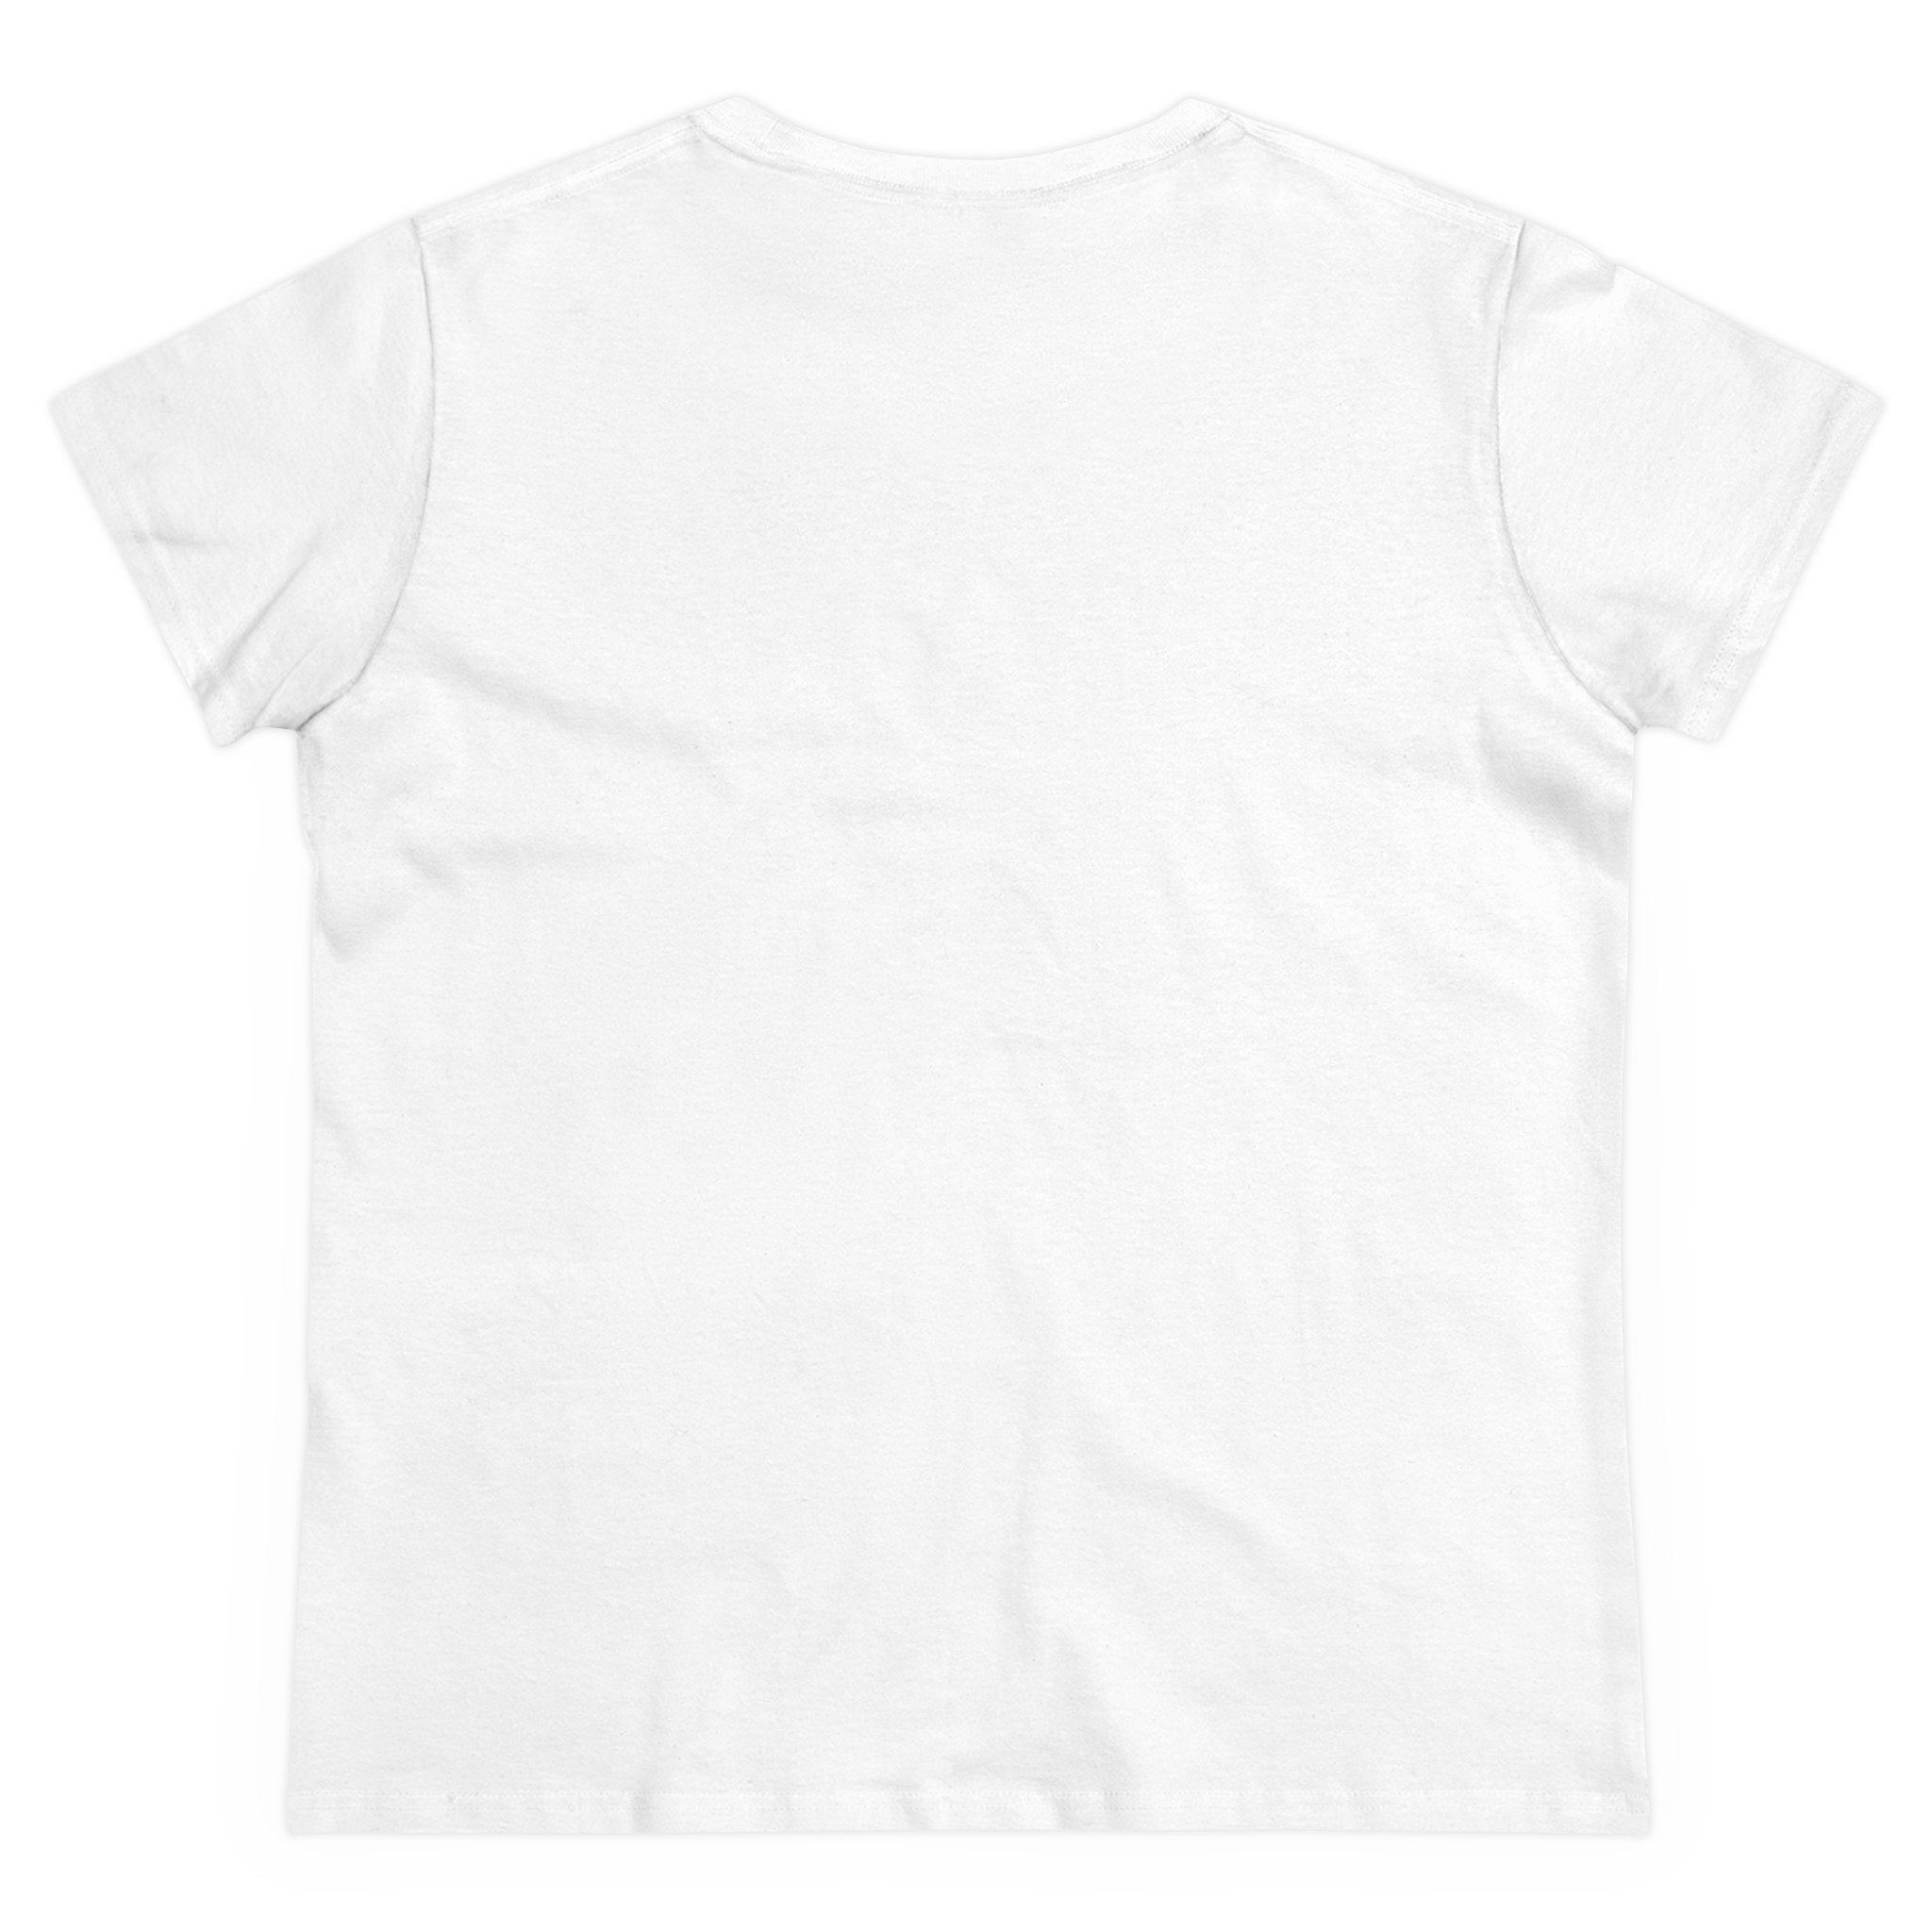 Back view of a plain white short-sleeved Star Wars Easter Stormtrooper - Women's Tee against a white background, perfect for customizing with your favorite Star Wars graphics or an Easter Stormtrooper design.